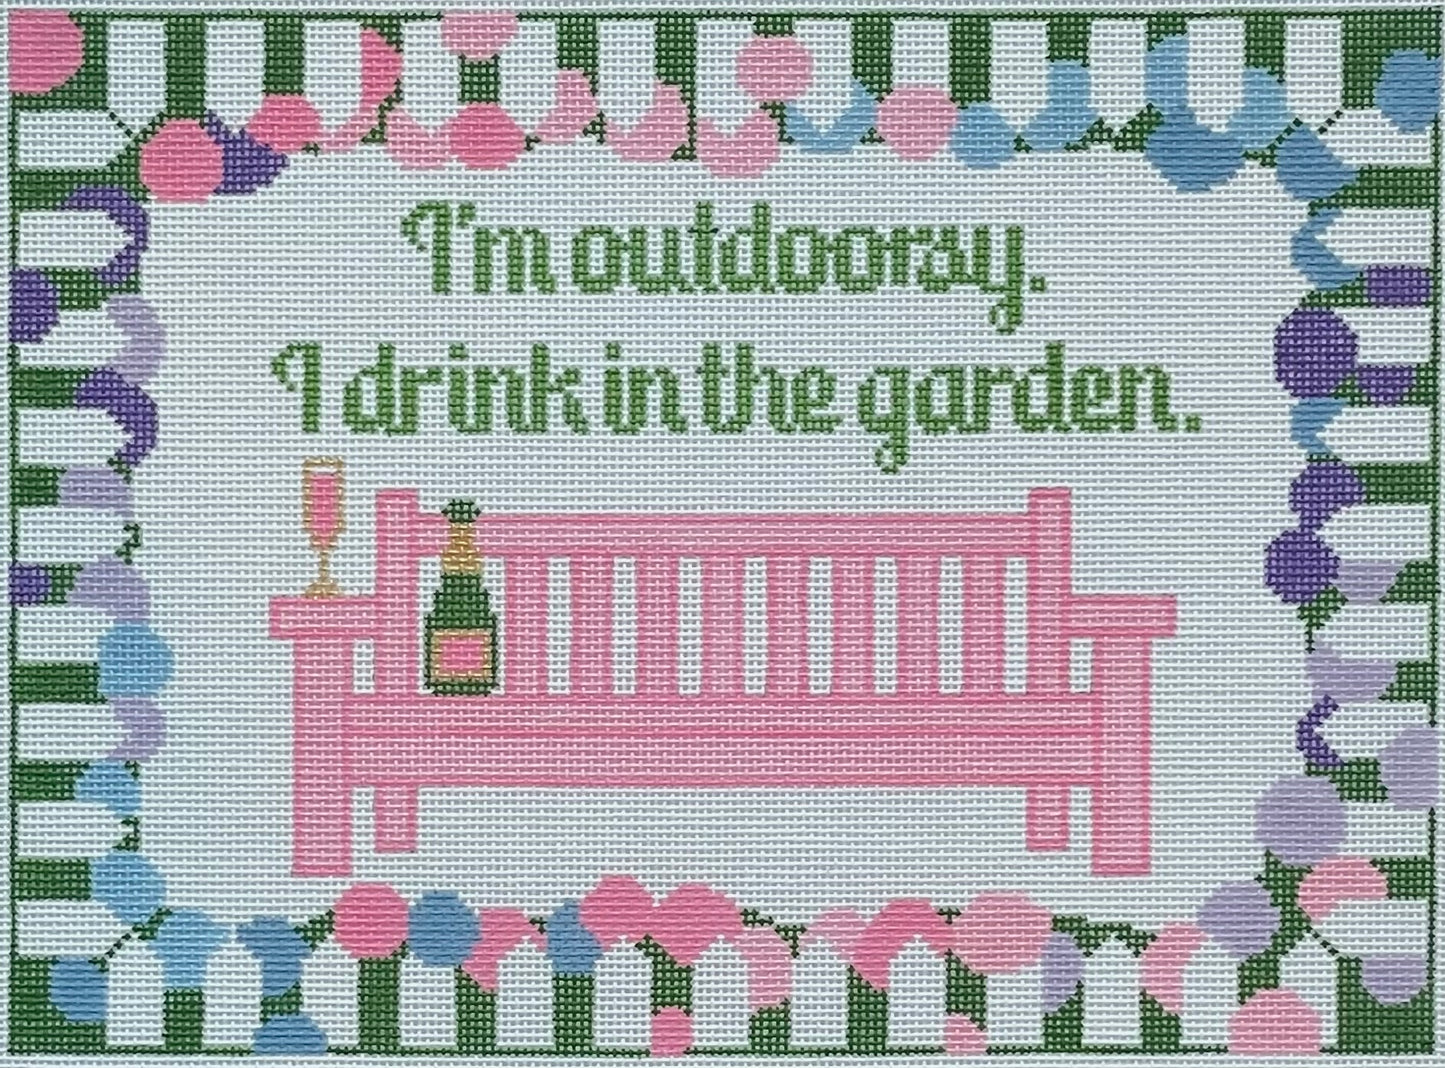 I’m Outdoorsy. I drink in the garden.